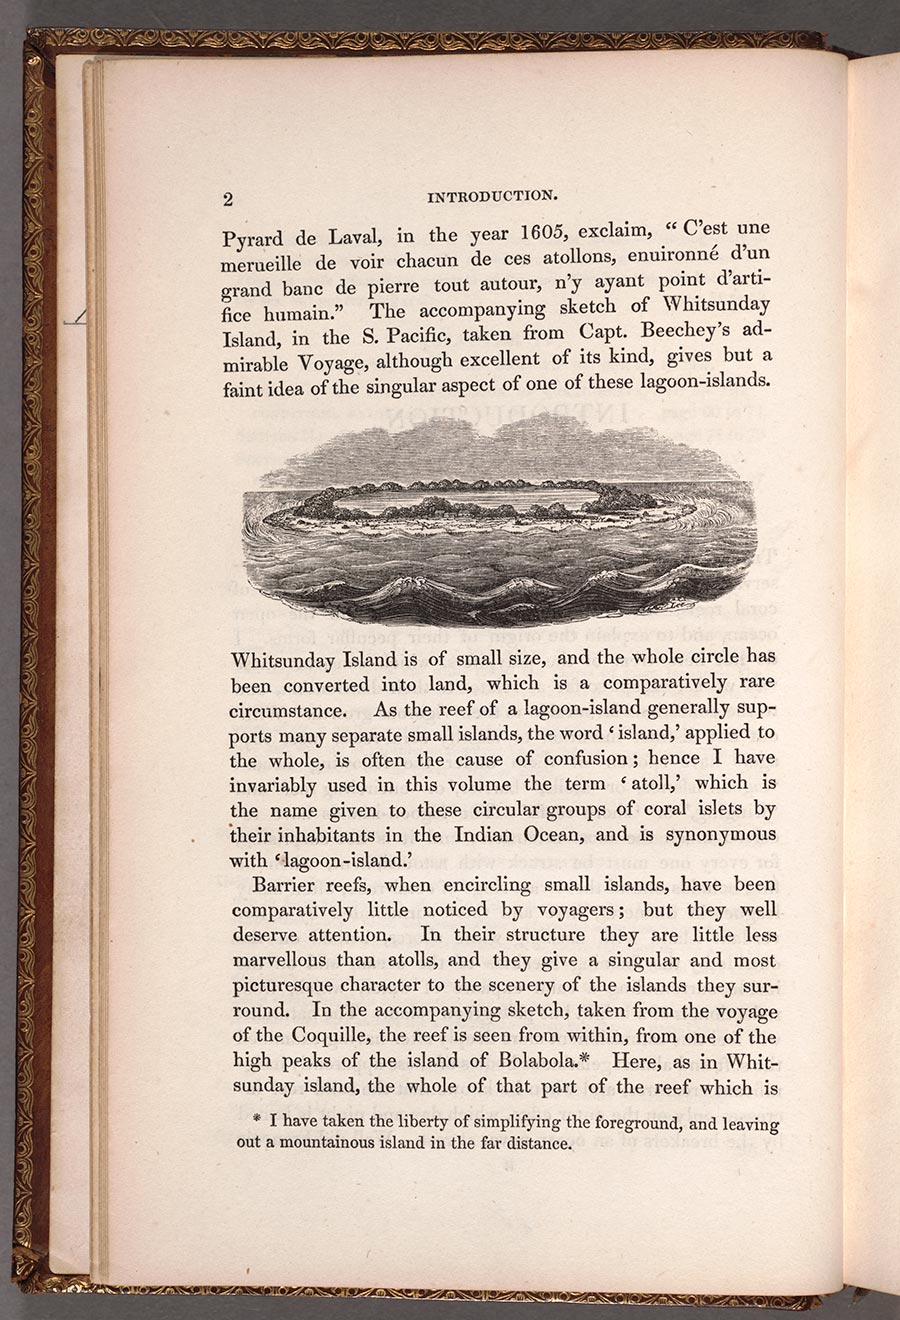 A page from a book with an illustration of a coral atoll.